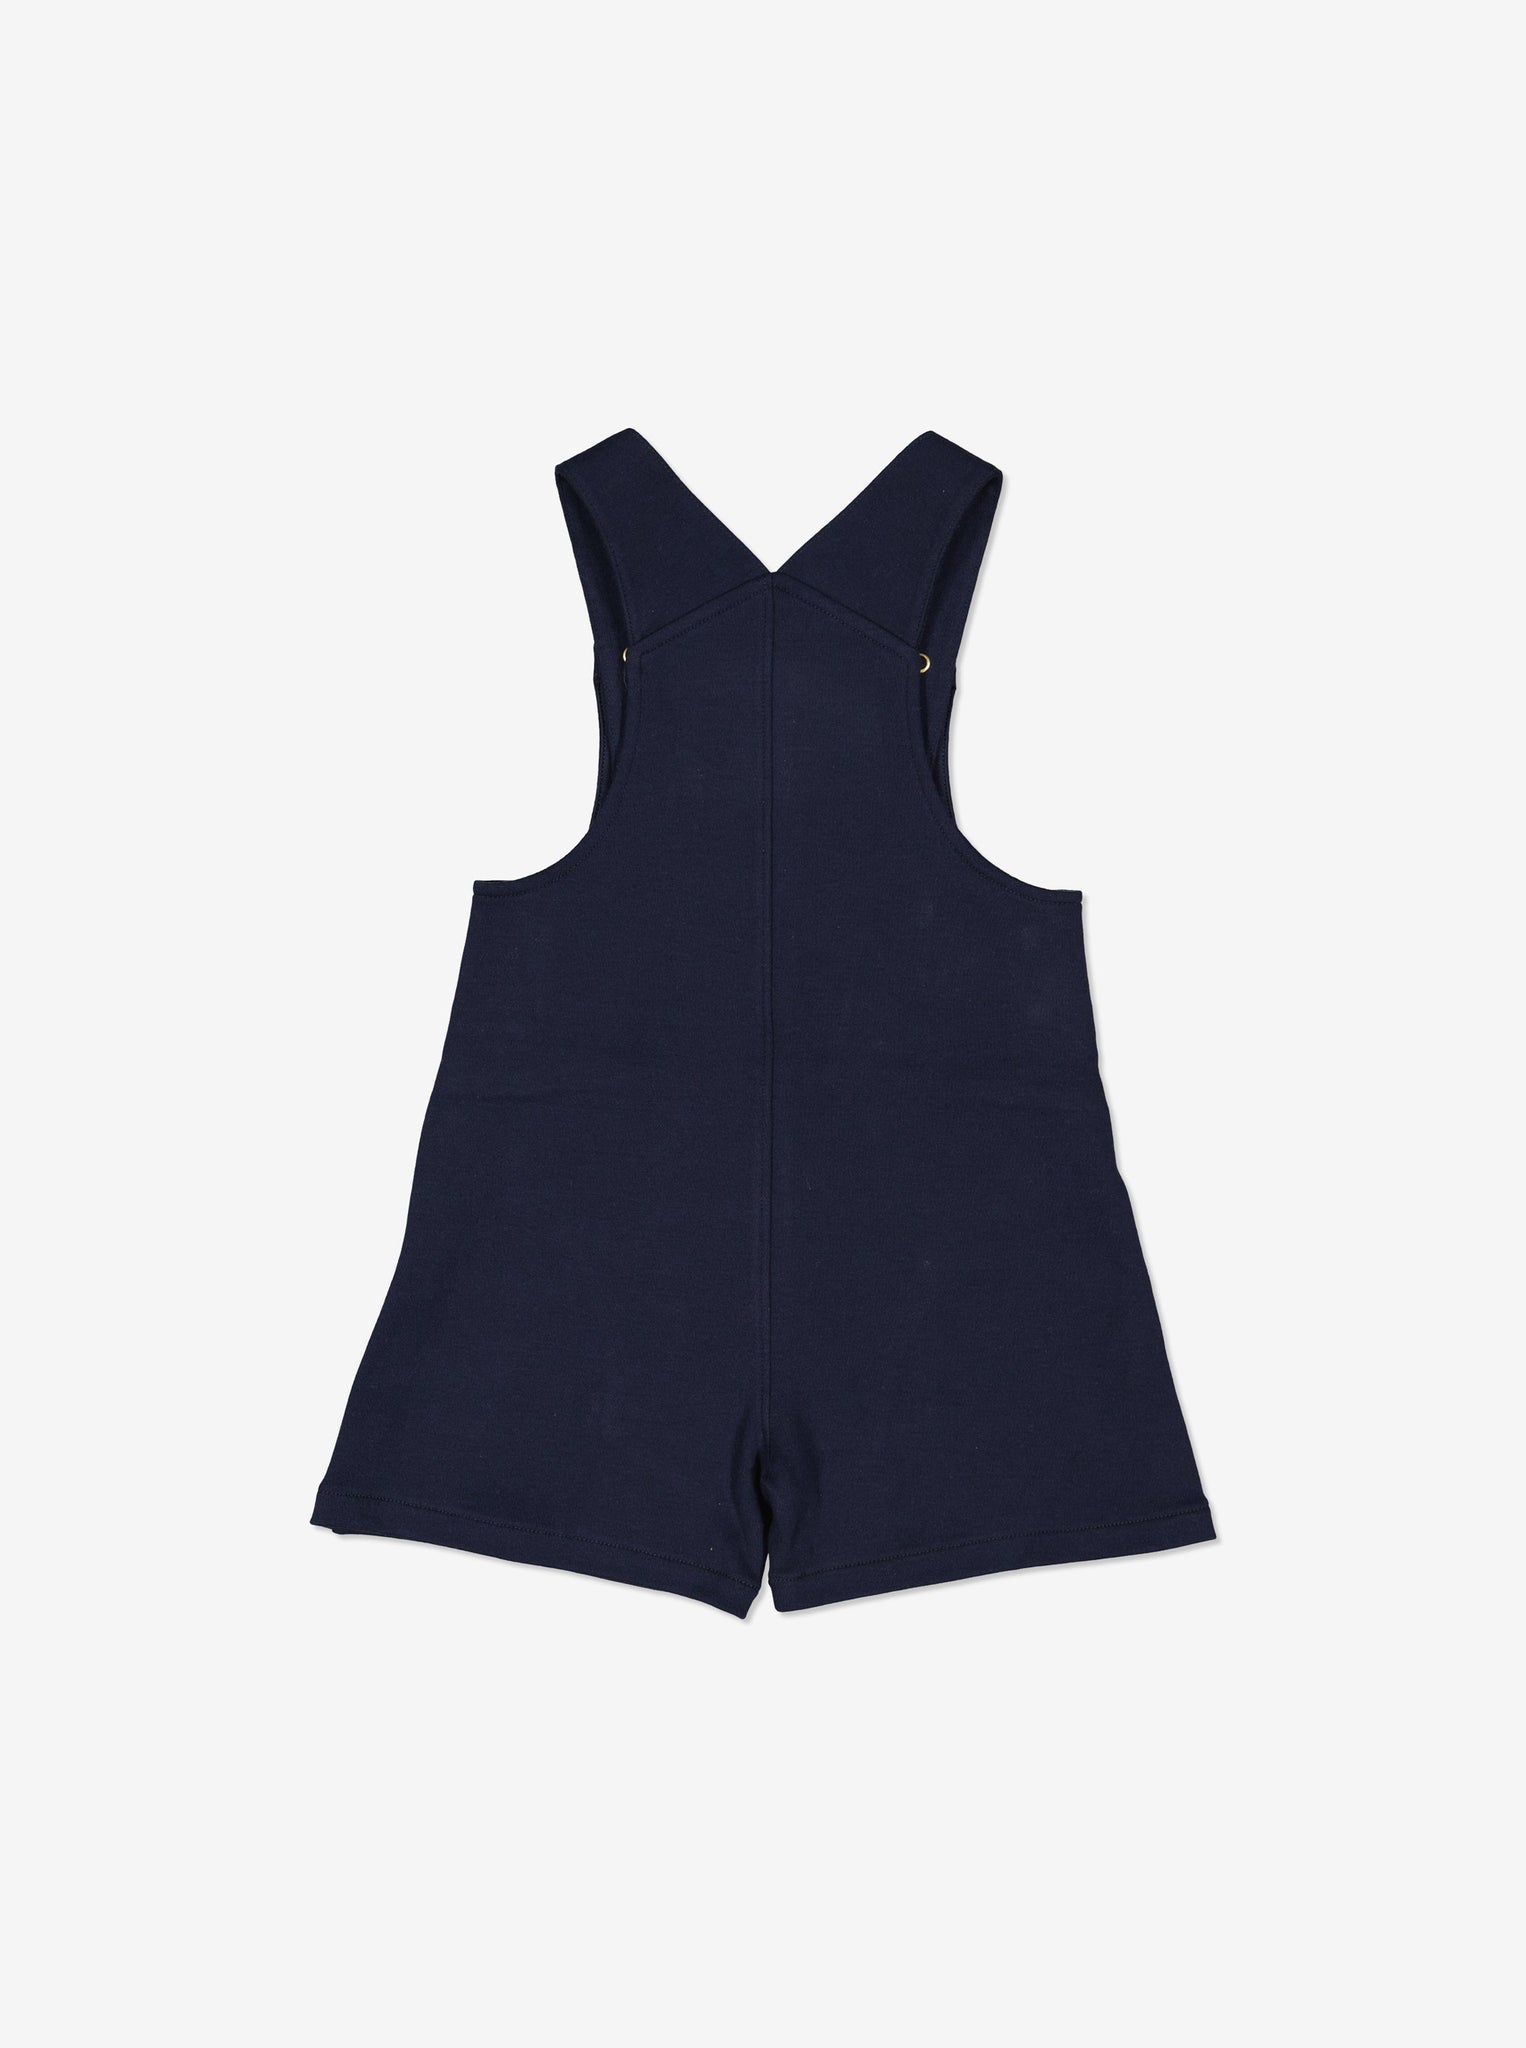 Organic Cotton Navy Baby Dungarees from Polarn O. Pyret Kidswear. Made from 100% GOTS Organic Cotton.